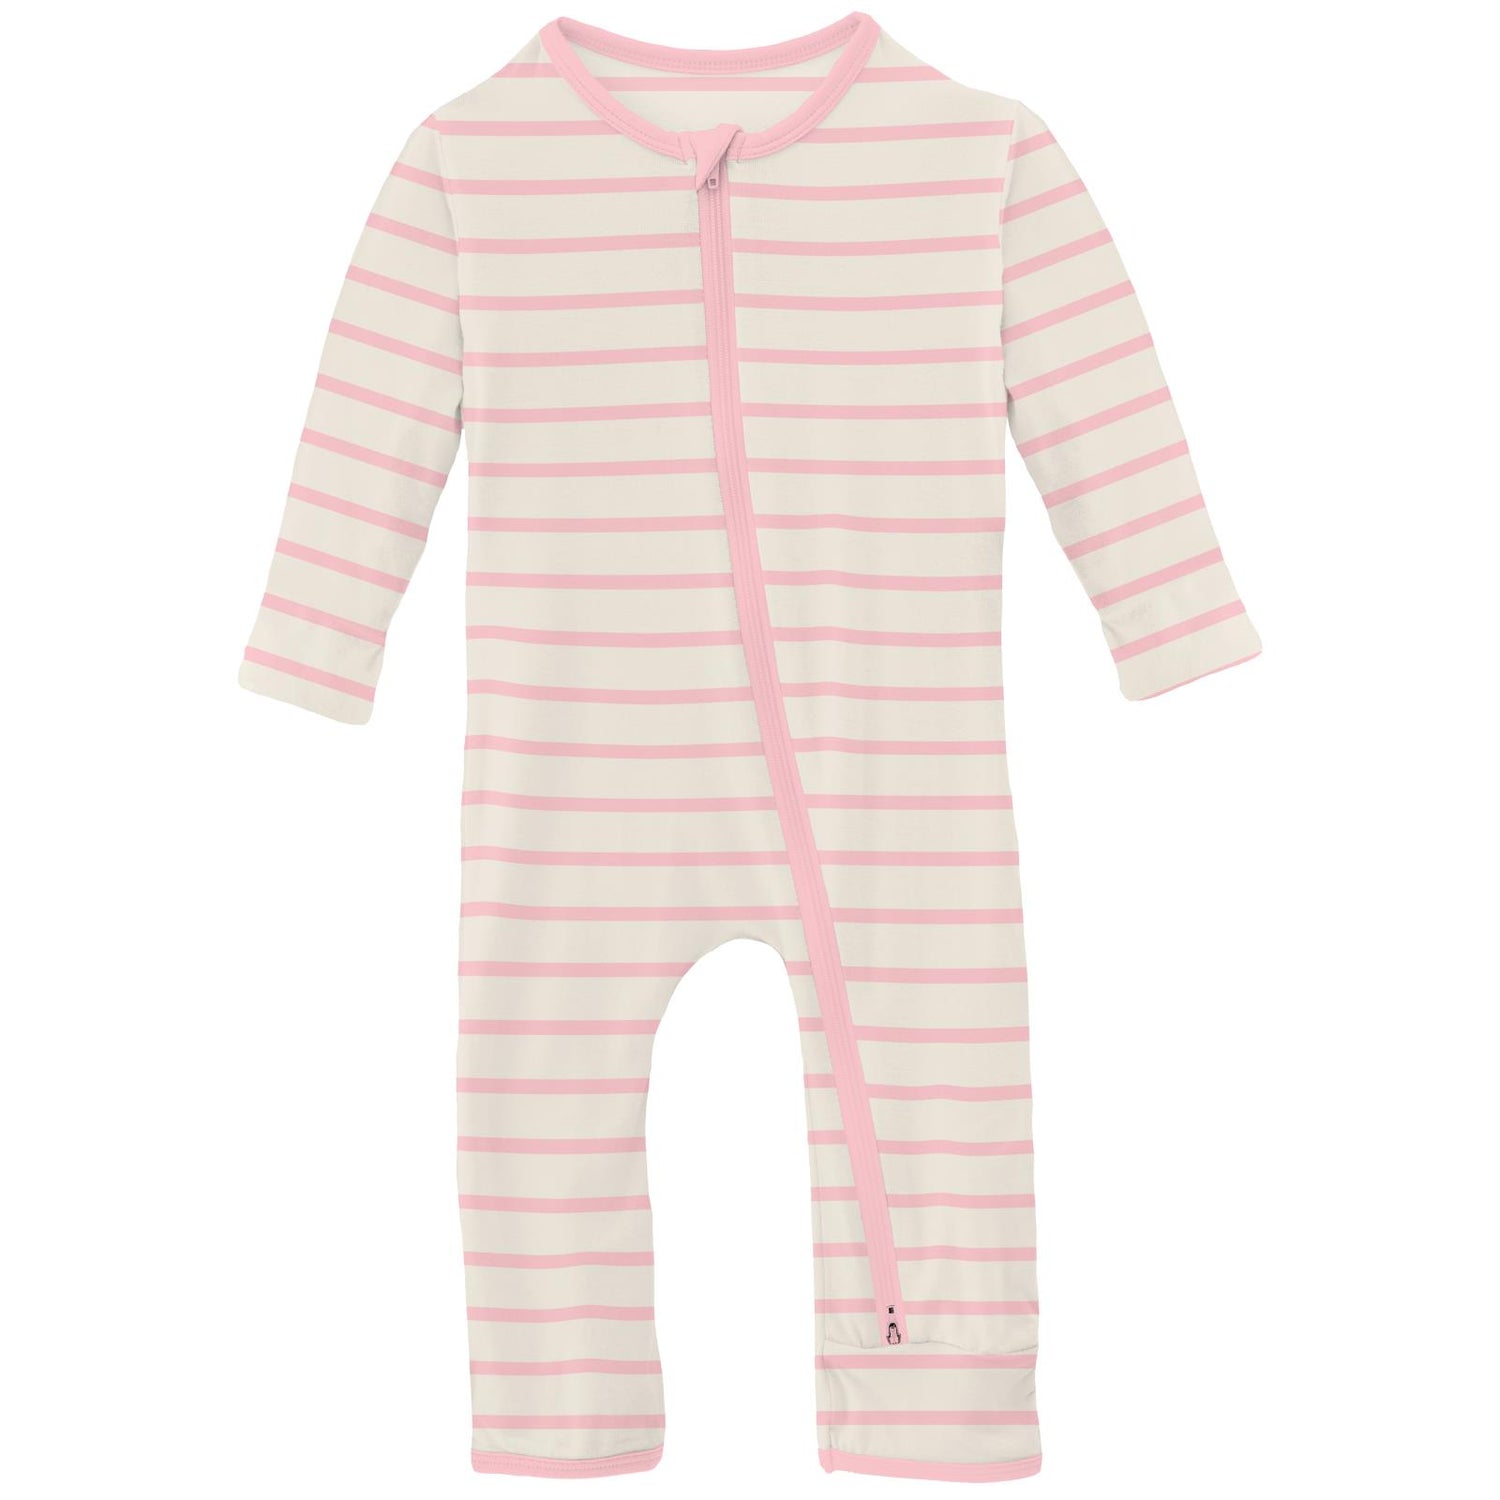 Print Coverall with 2 Way Zipper in Lotus Sweet Stripe